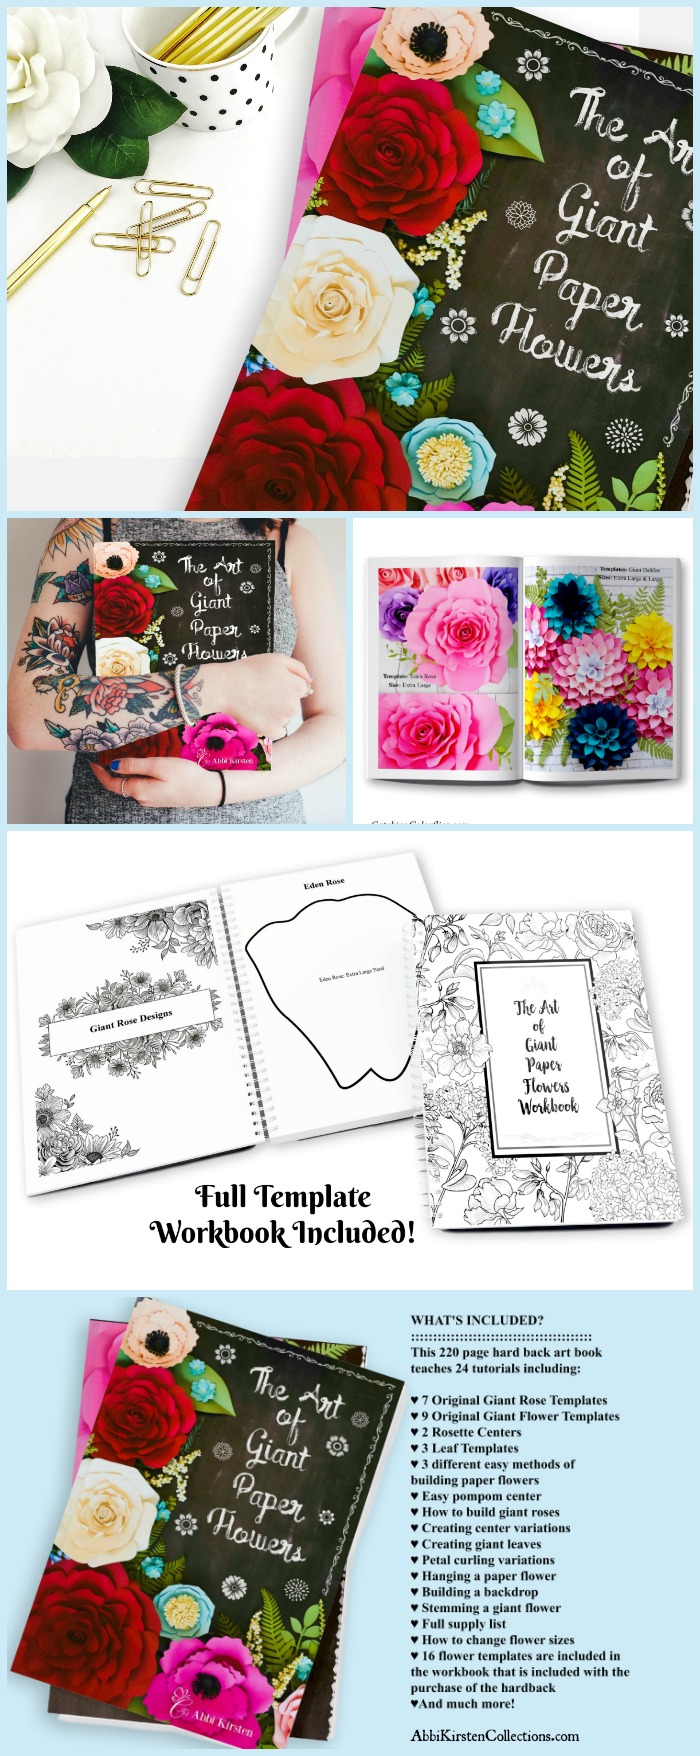 Free Giant Paper Flower Template. Learn to create beautiful paper flowers from our best selling book, The Art of Giant Paper Flowers by Abbi Kirsten Collections.